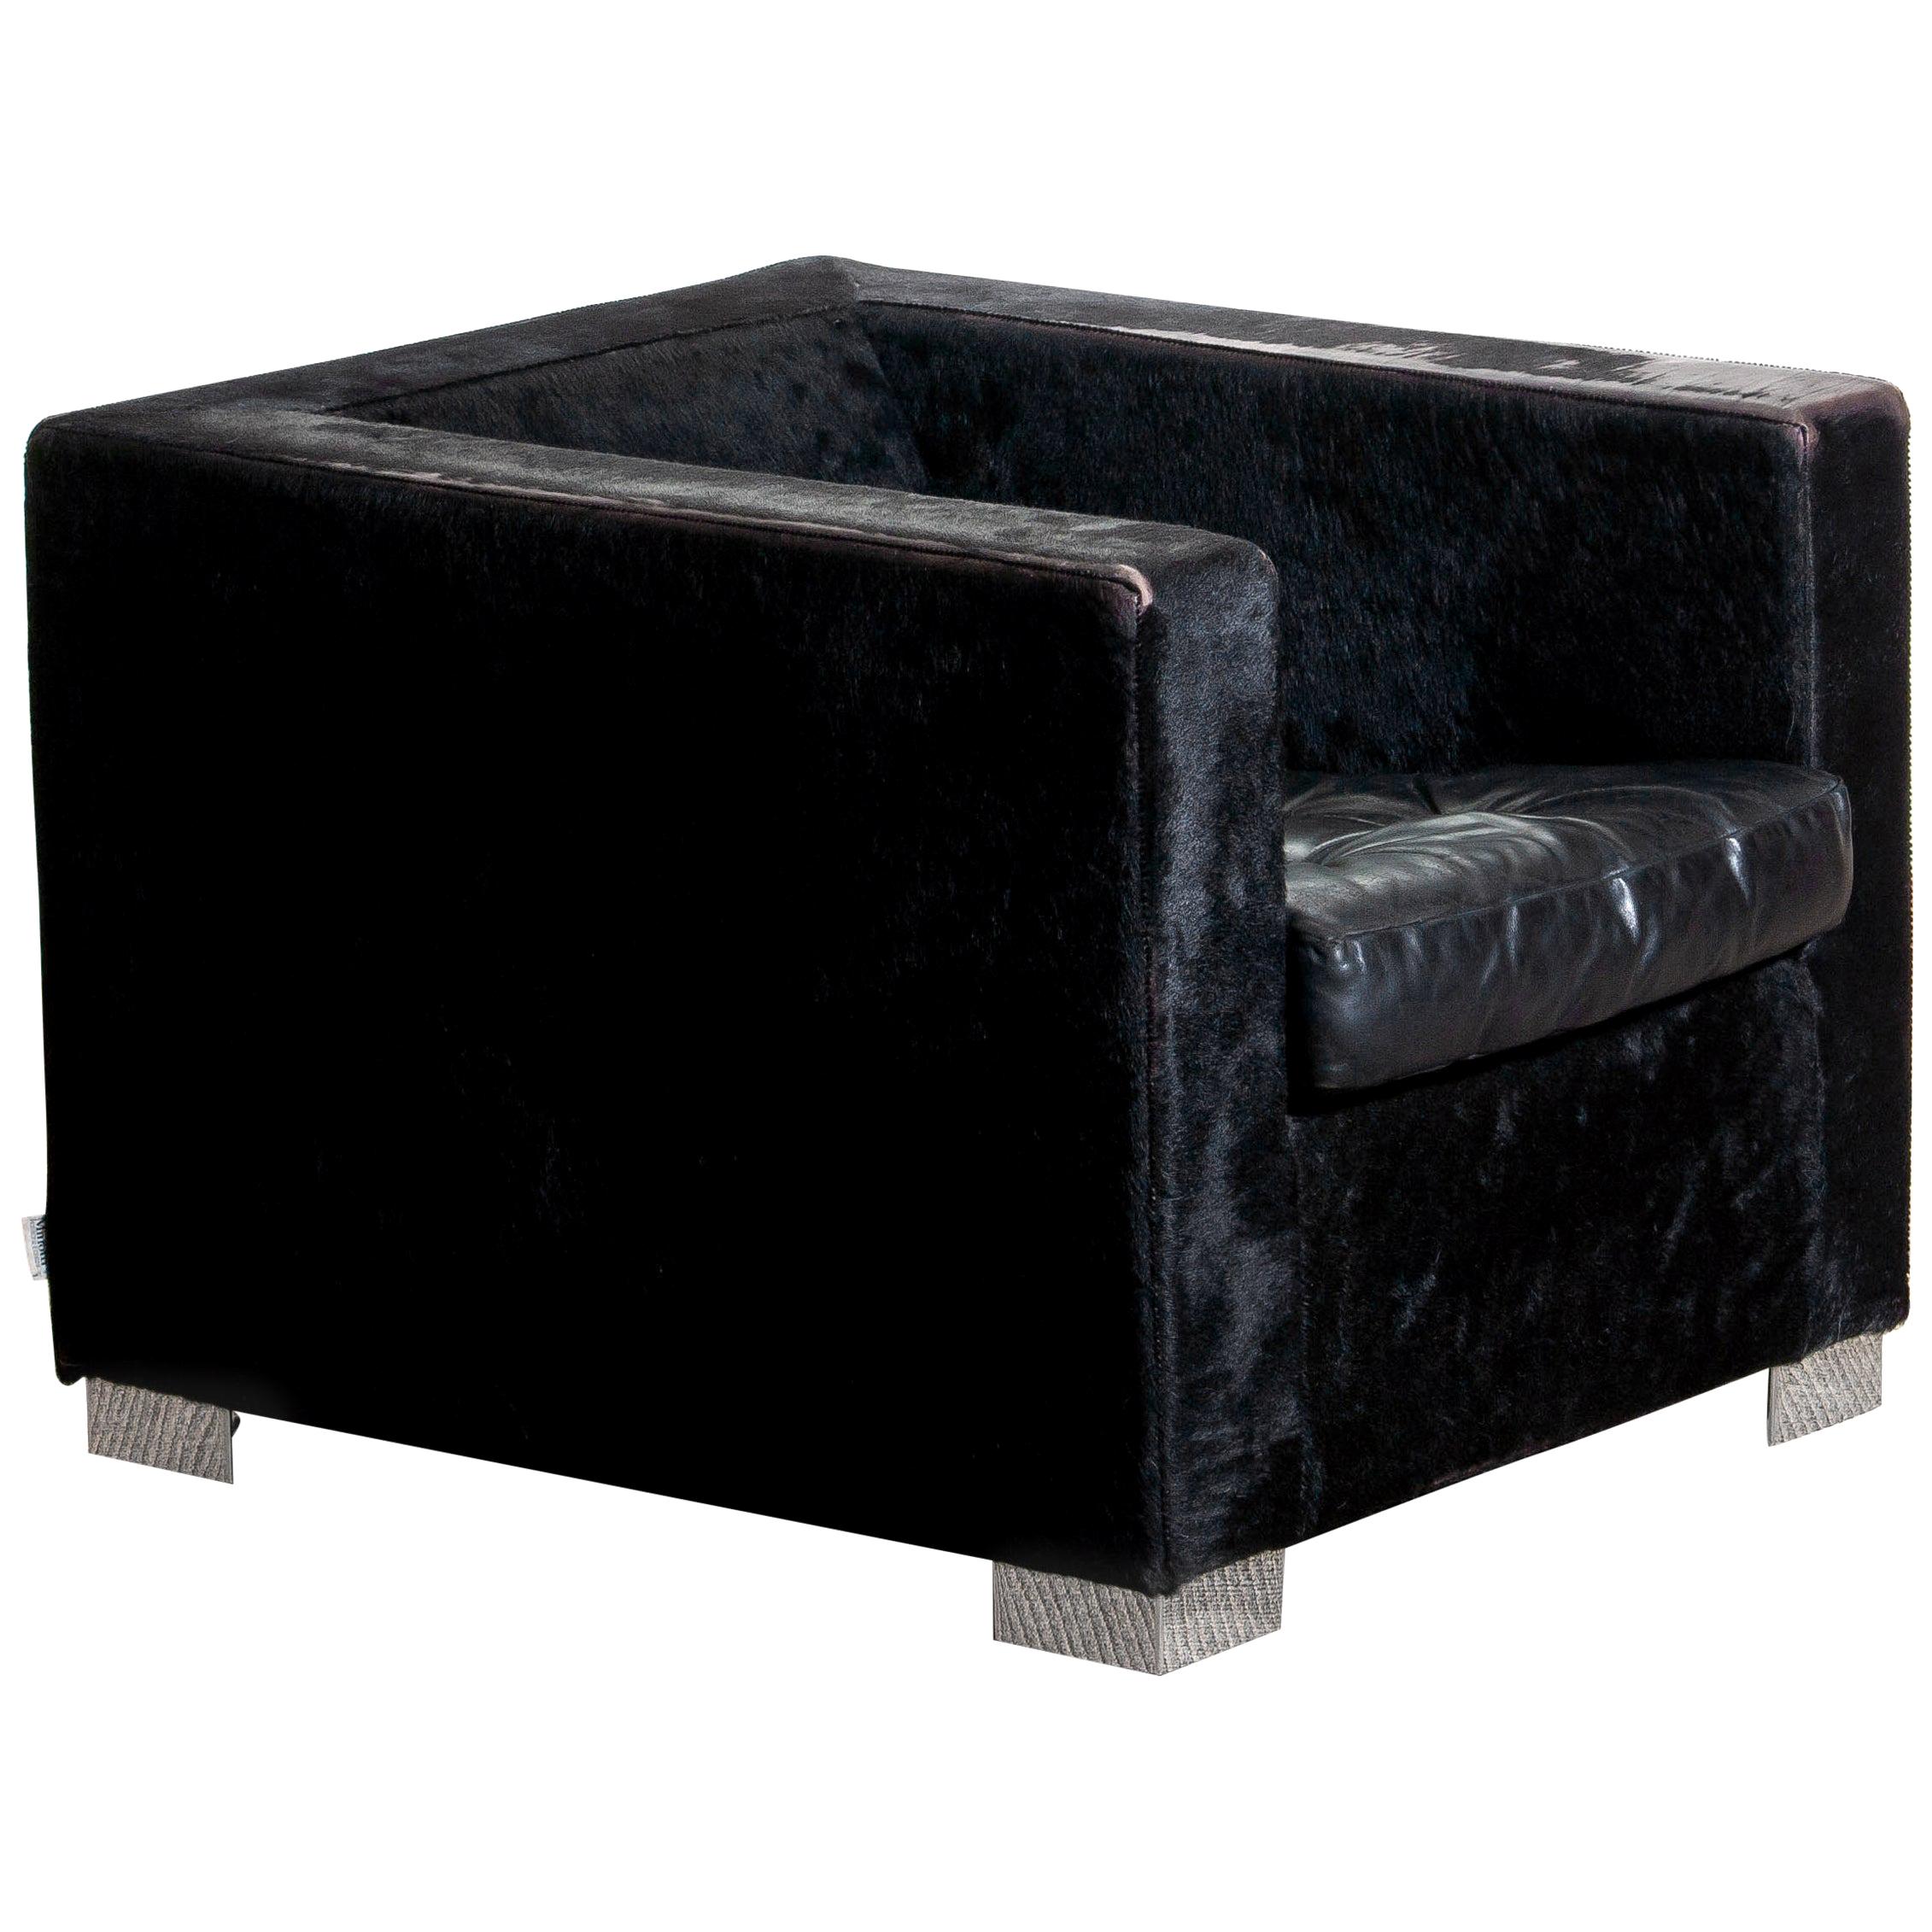 1990, contemporary “Suitcase” armchair designed by Rodolfo Dordoni for Minotti.
Upholstered with black pony and the padded seat cushion, also black, is upholstered with leather.
Standing on squared chromed metal legs.
The overall condition is